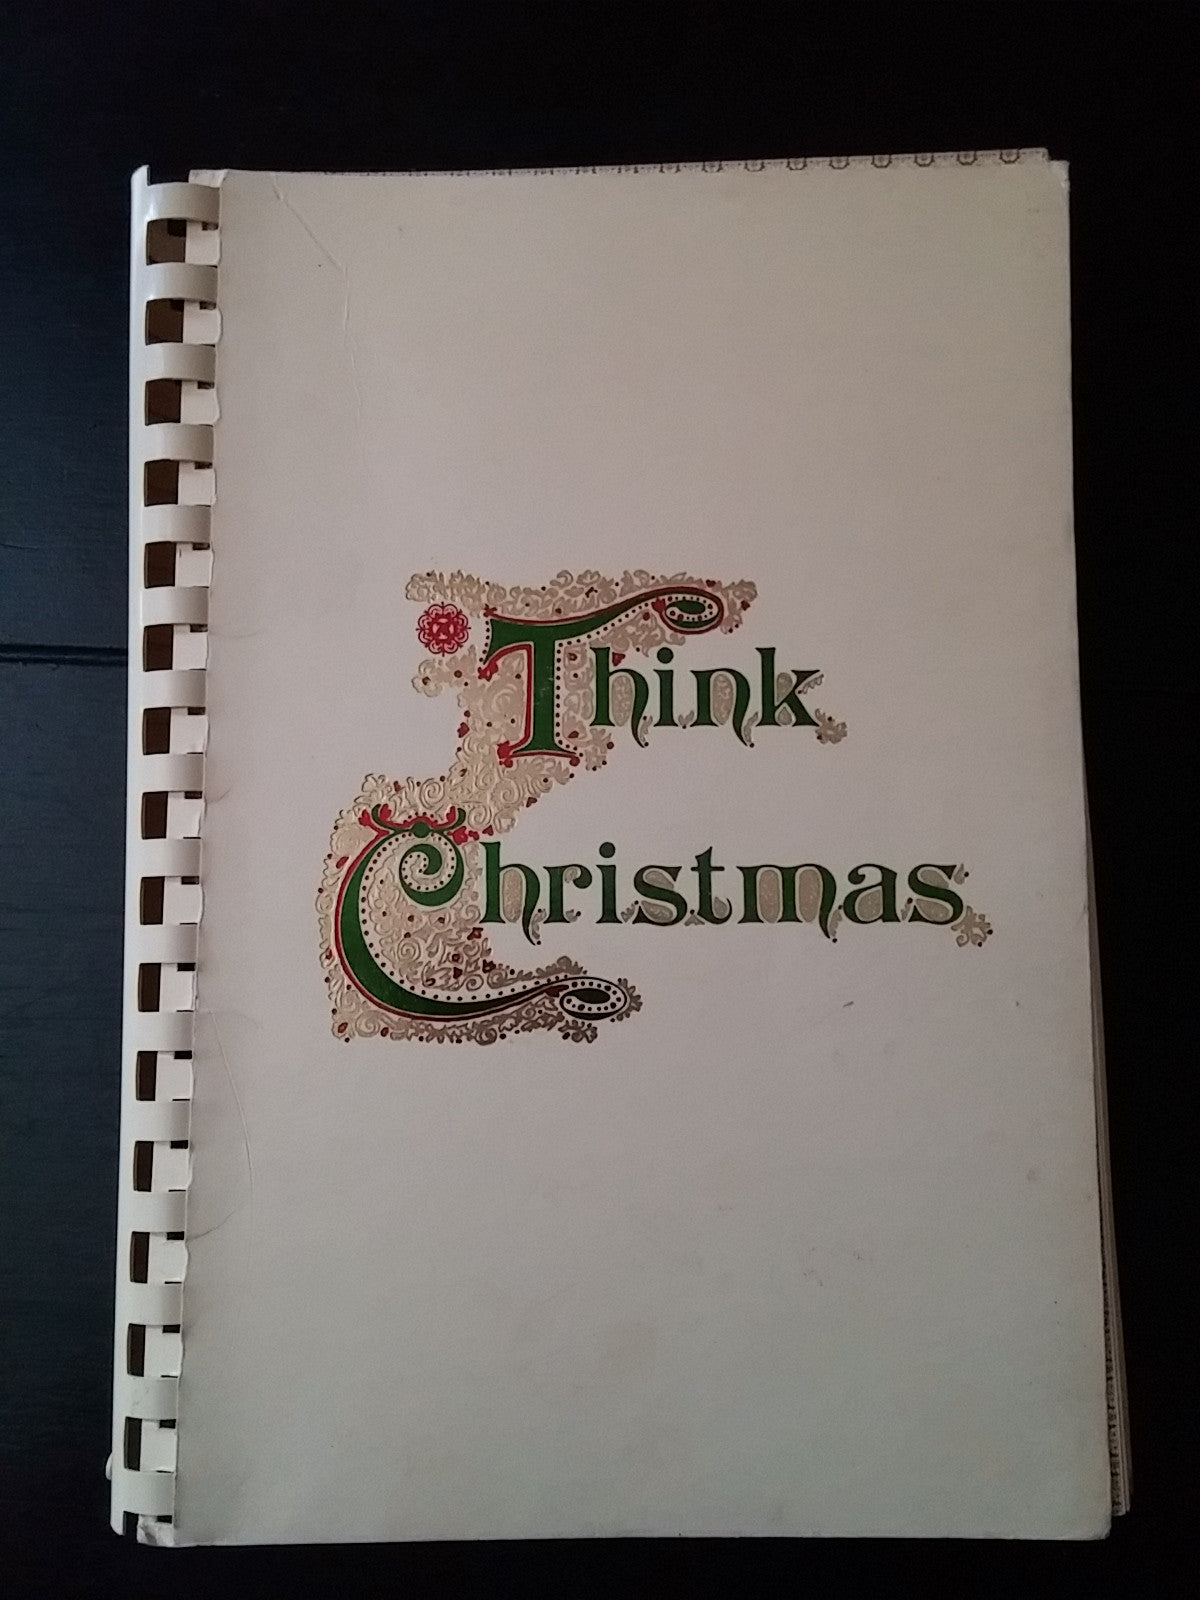 Vintage Christmas Book - "Think Christmas" 1970s Crafts, Recipes, Gifts - Dirty 30 Vintage